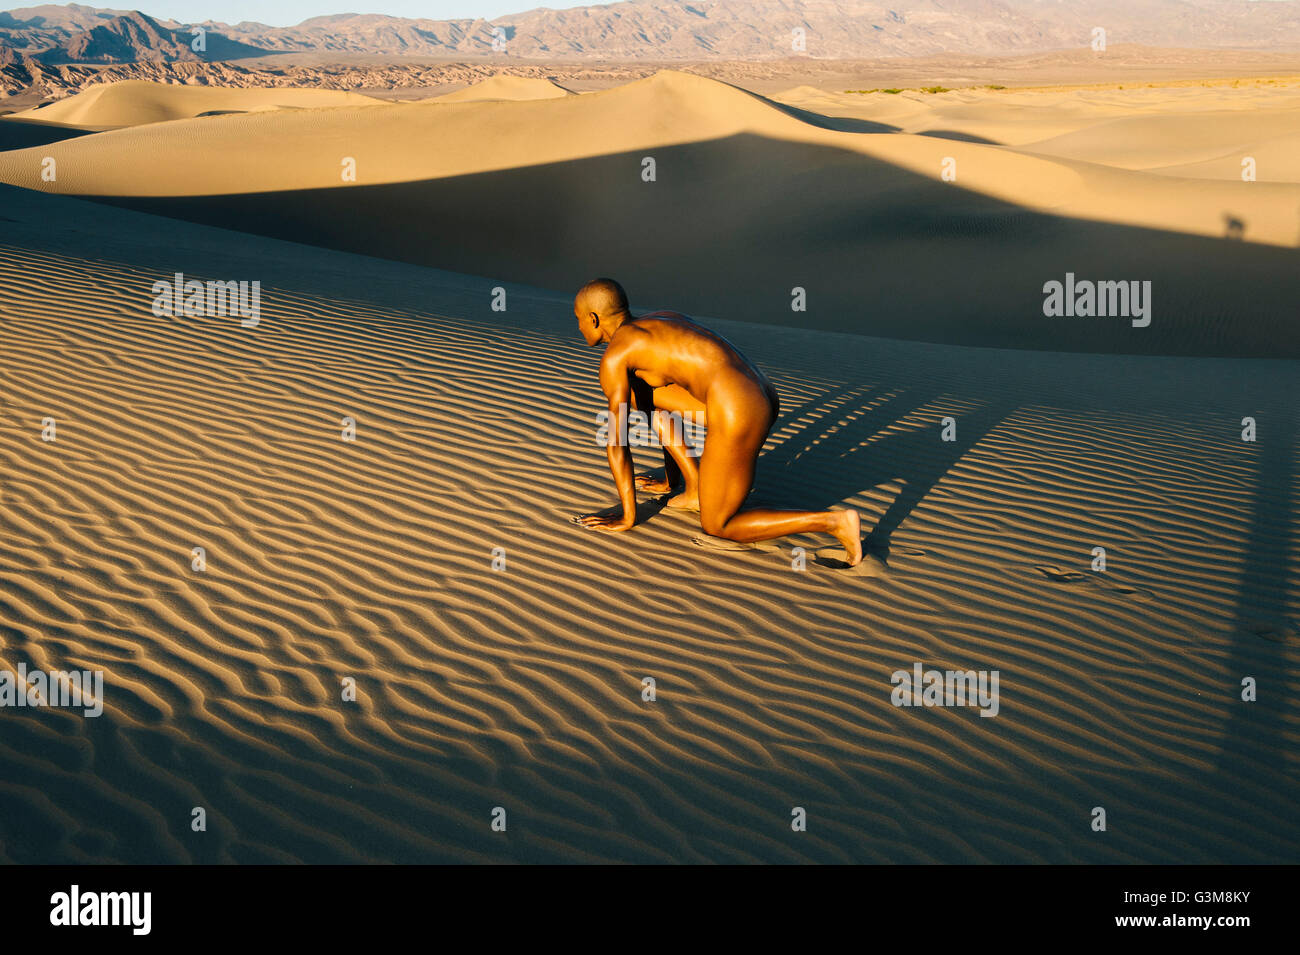 Nude woman in start position in dessert Stock Photo